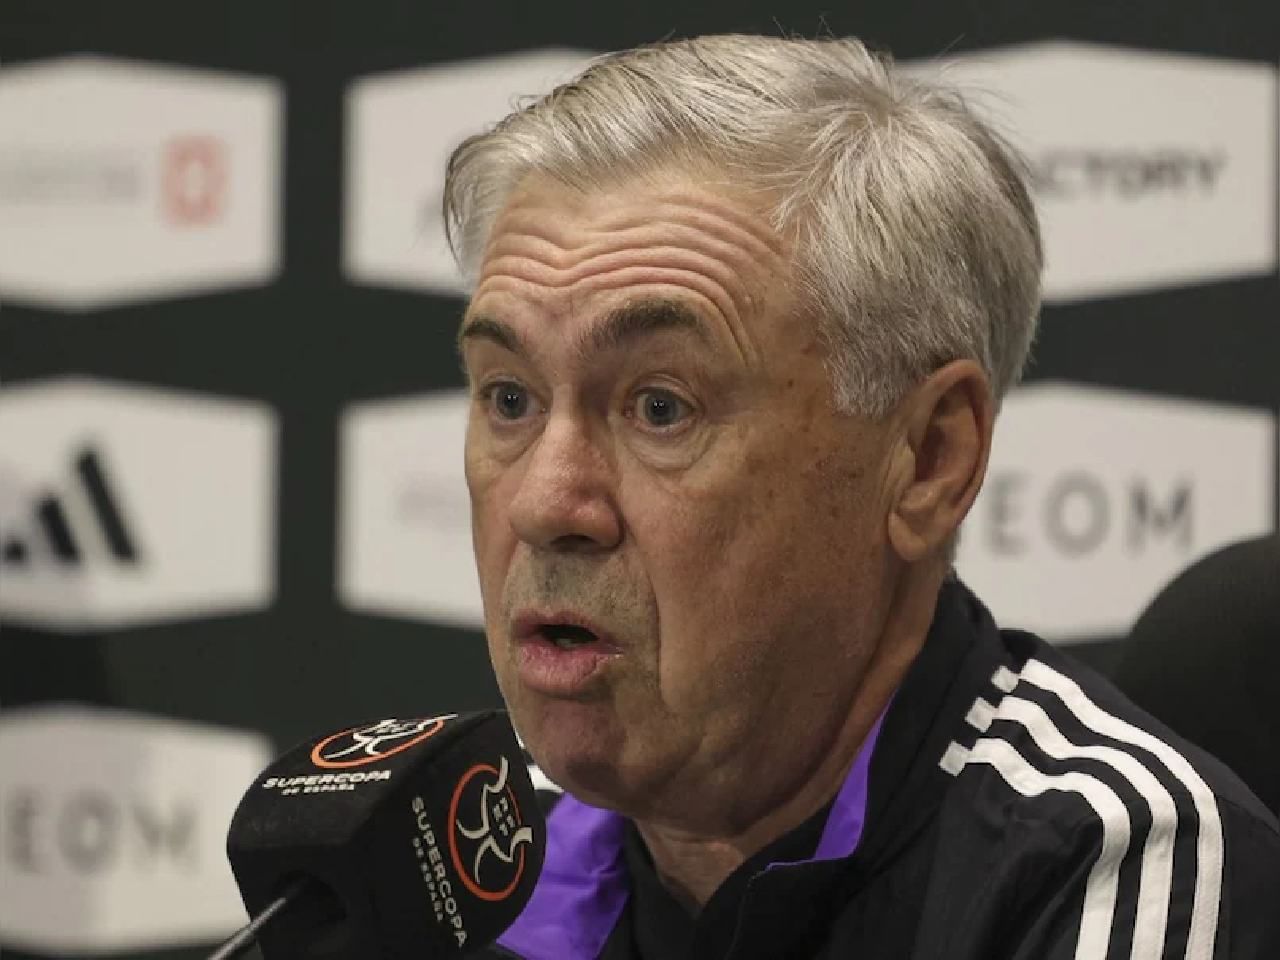 Copa del Rey past means little to Ancelotti as he eyes methodical show vs nemesis Barcelona